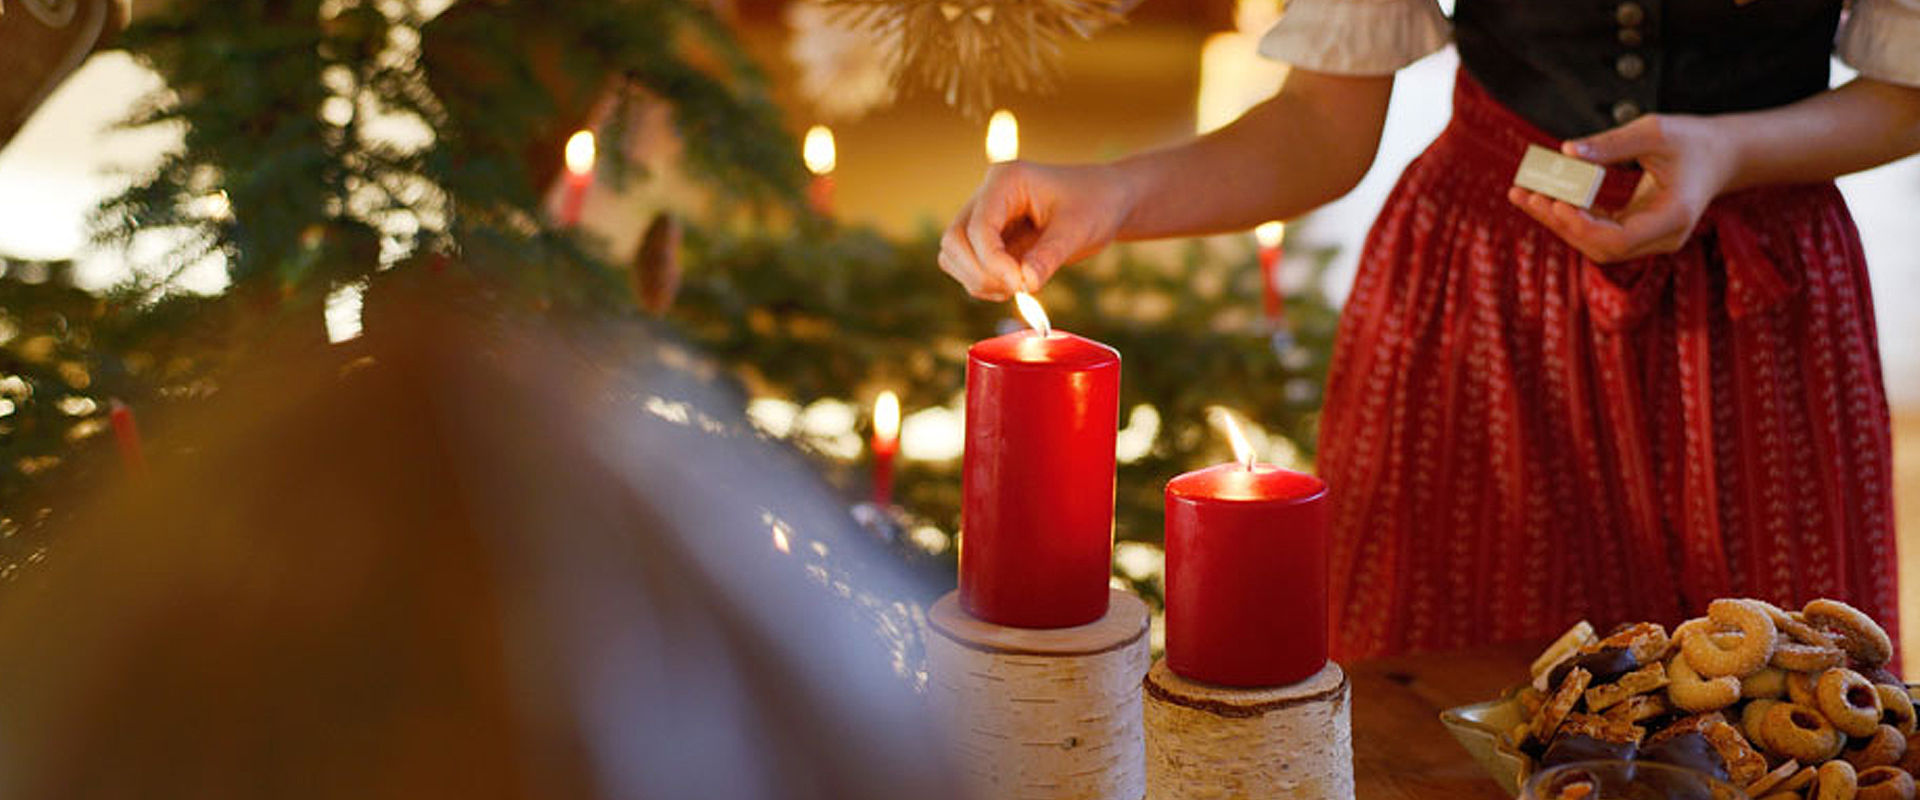 Woman in dirndl lights red candle and next to it are Christmas biscuits